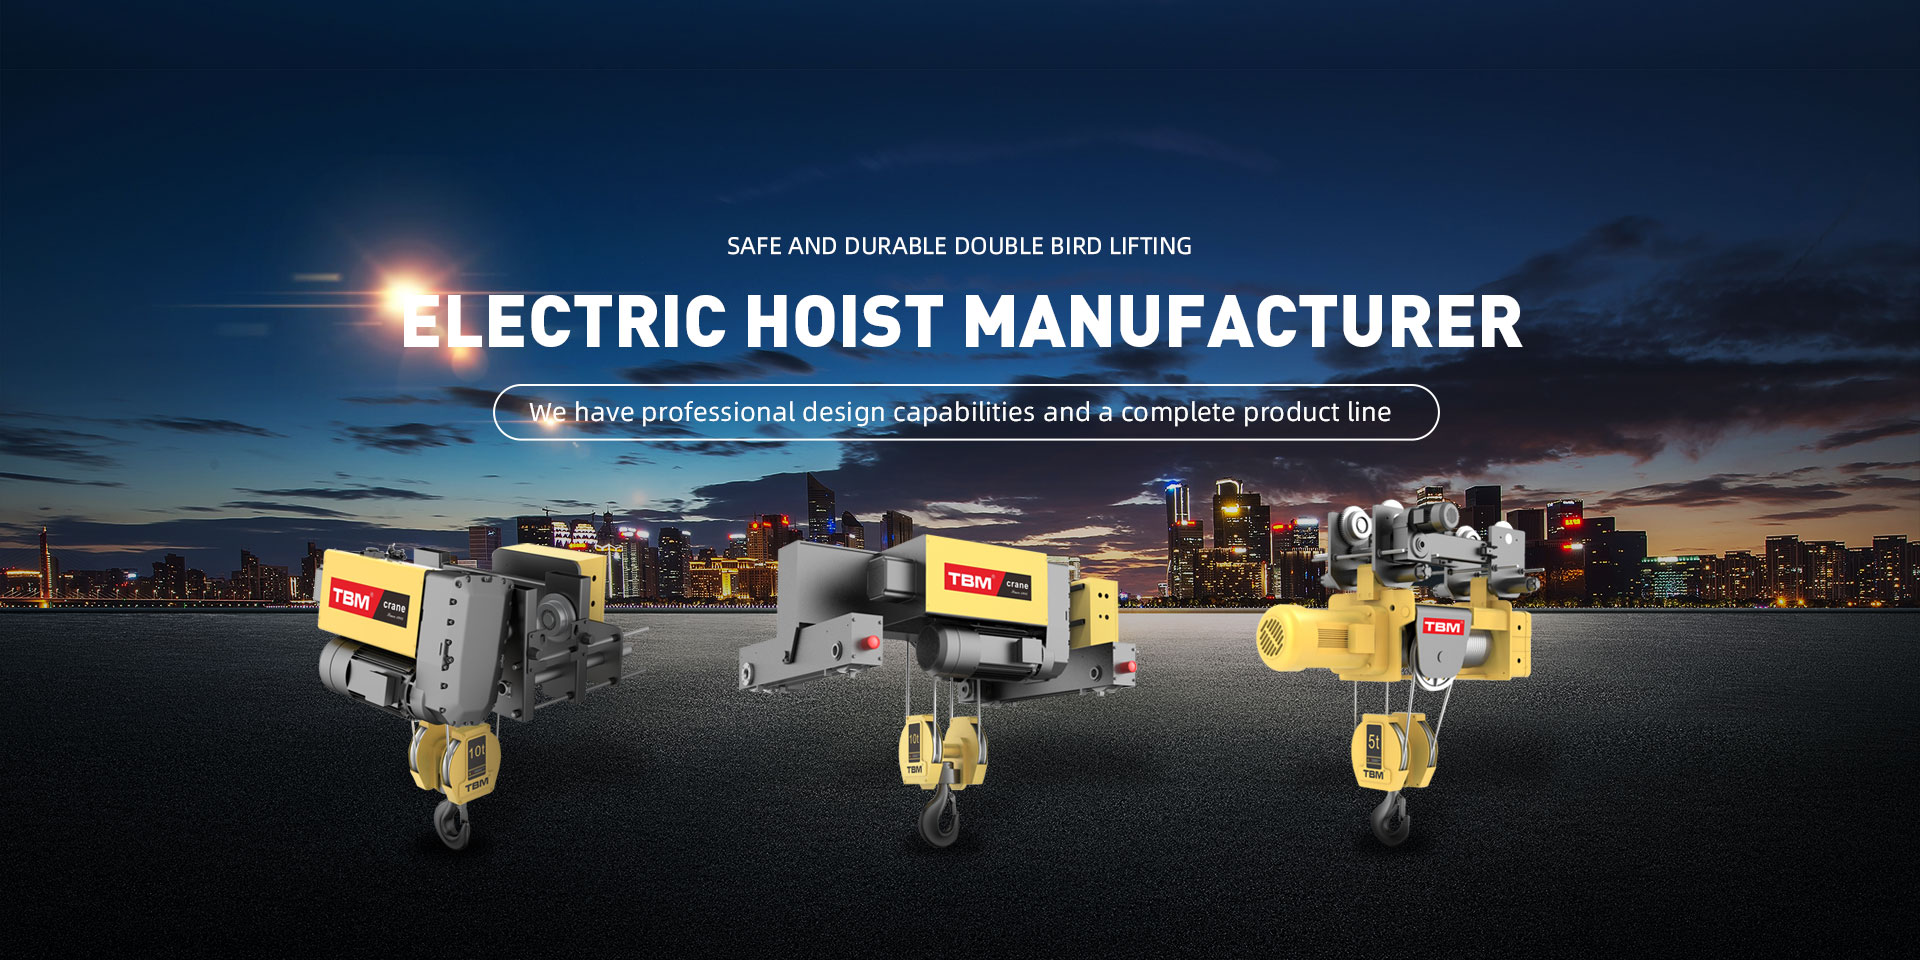 All You Need to Know About Electric Hoists in the Industrial Equipment and Components Industry